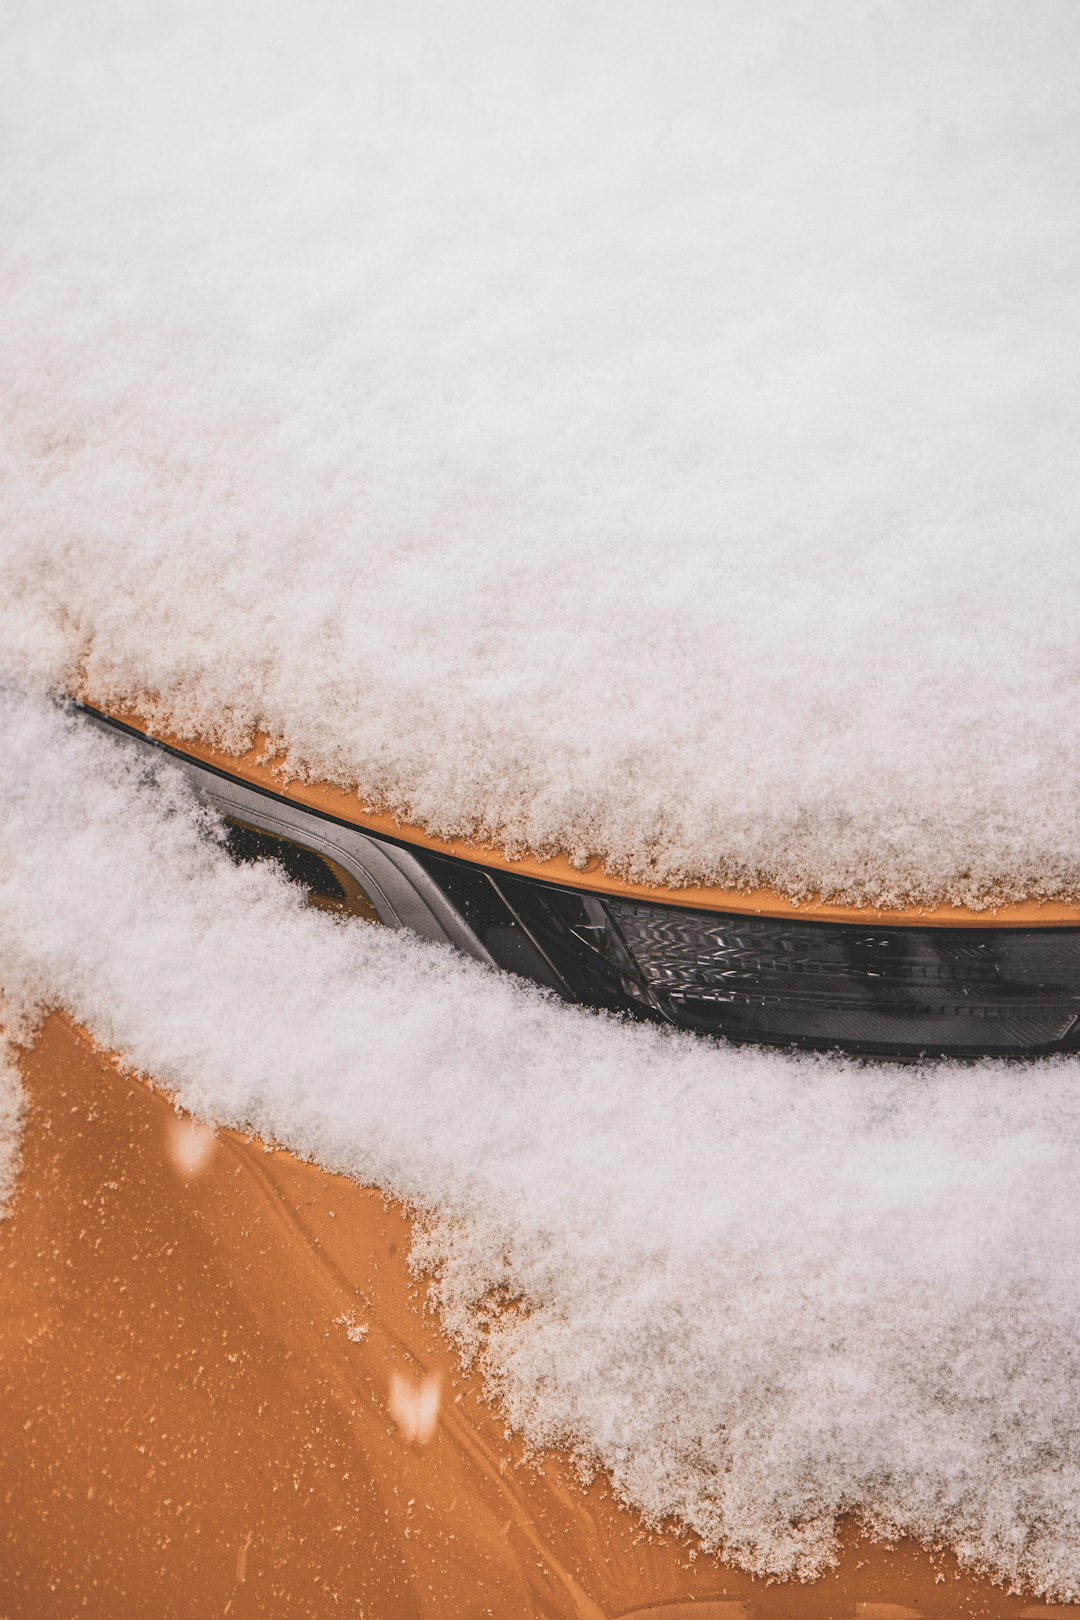 snow covered car during daytime